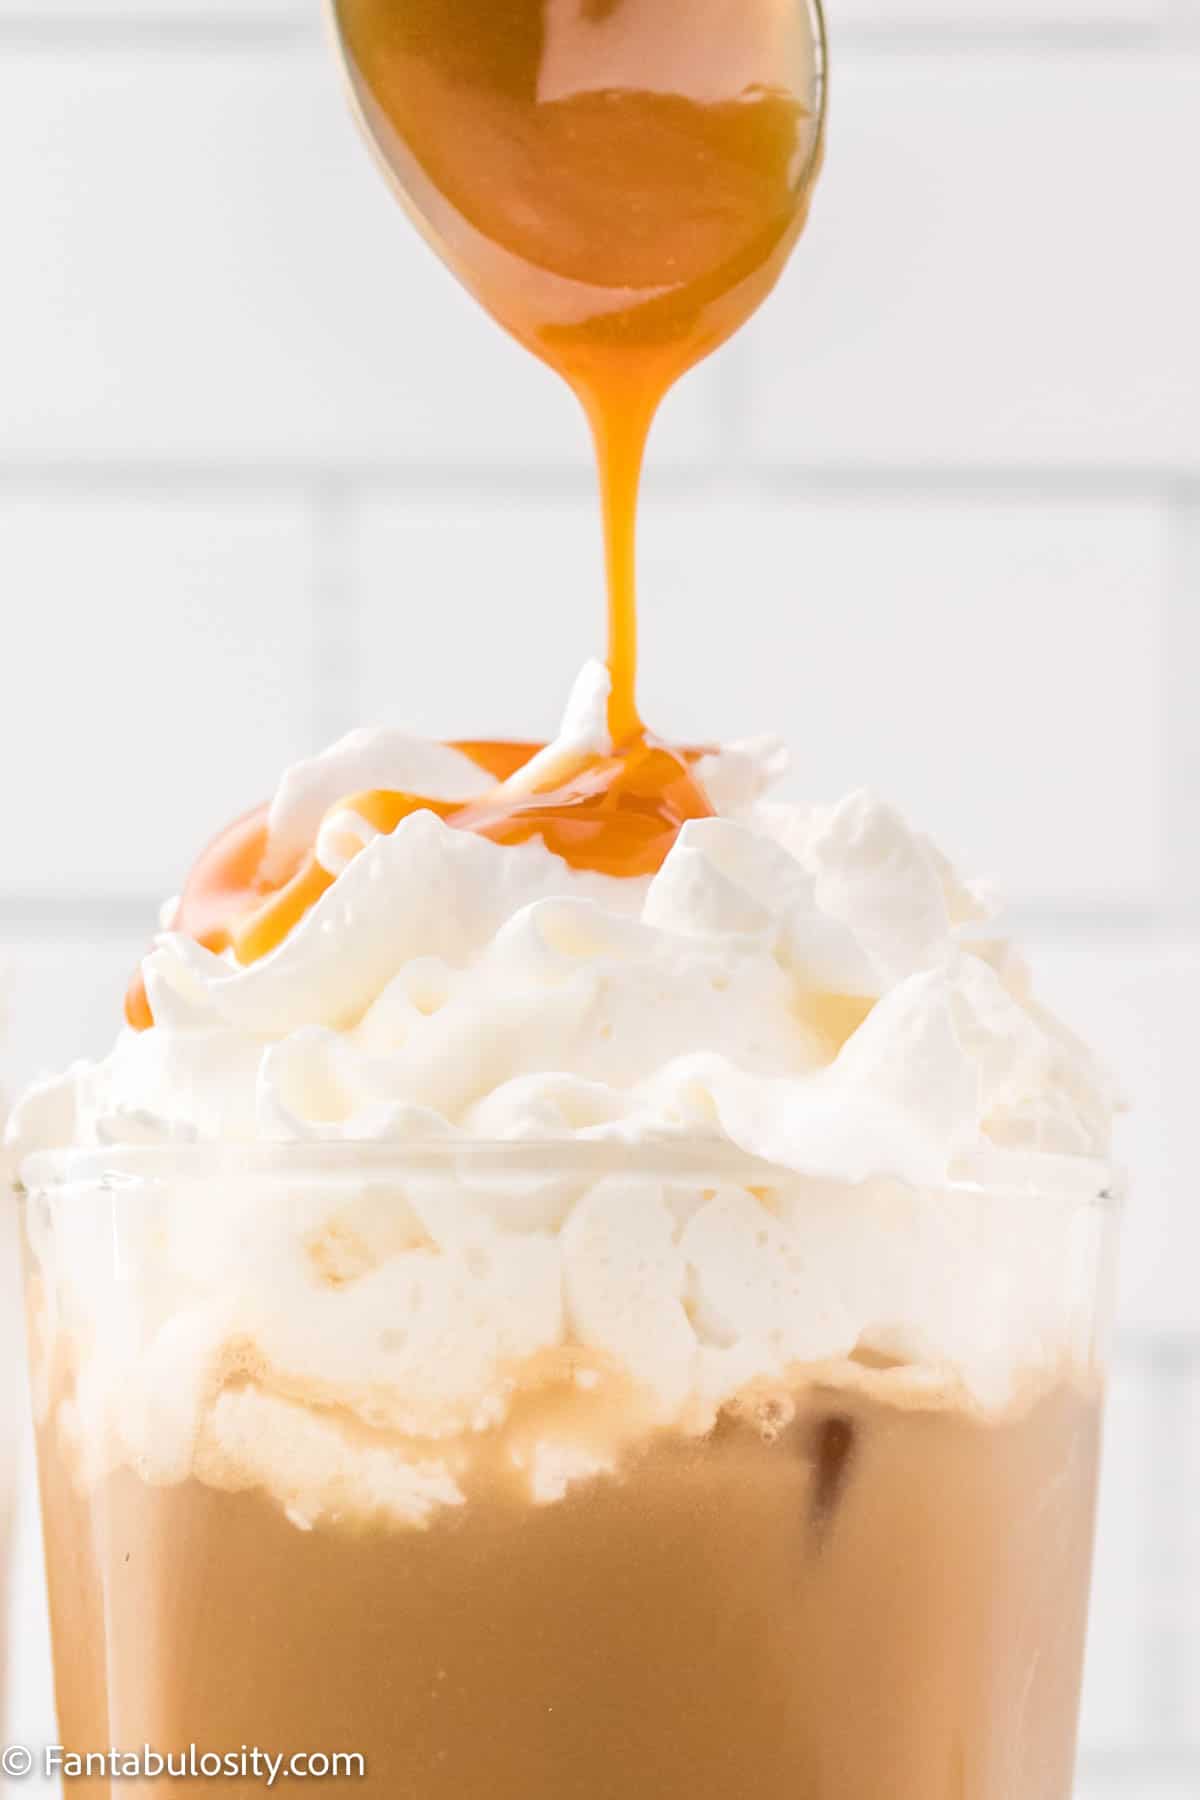 Caramel from a spoon is being drizzle over the top of a glass of iced coffee topped with whipped cream